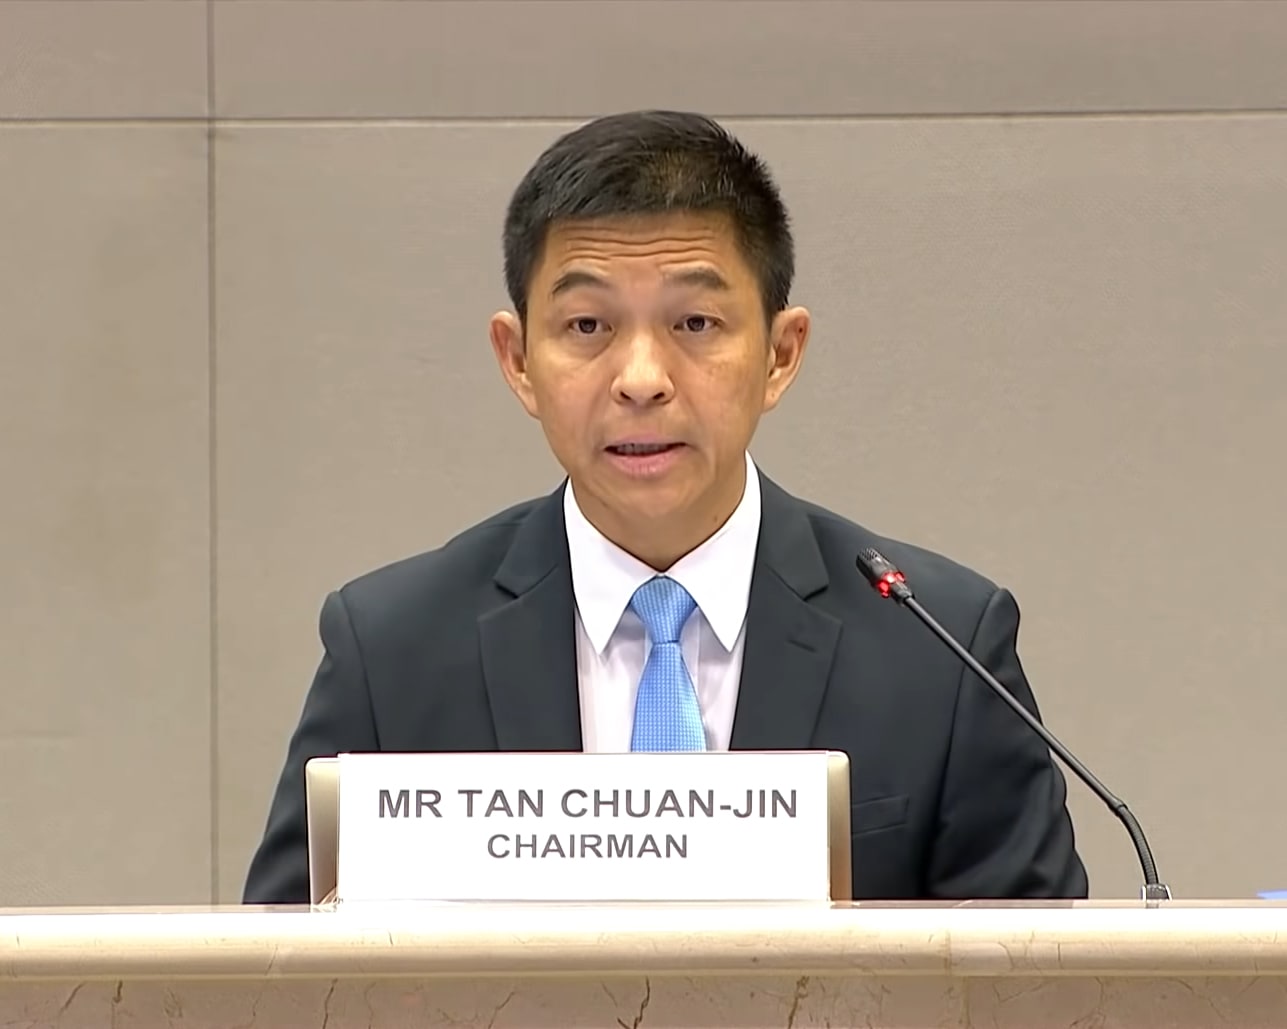 Speaker of Parliament Tan Chuan-Jin at a Committee of Privileges hearing on Dec 10, 2021. 